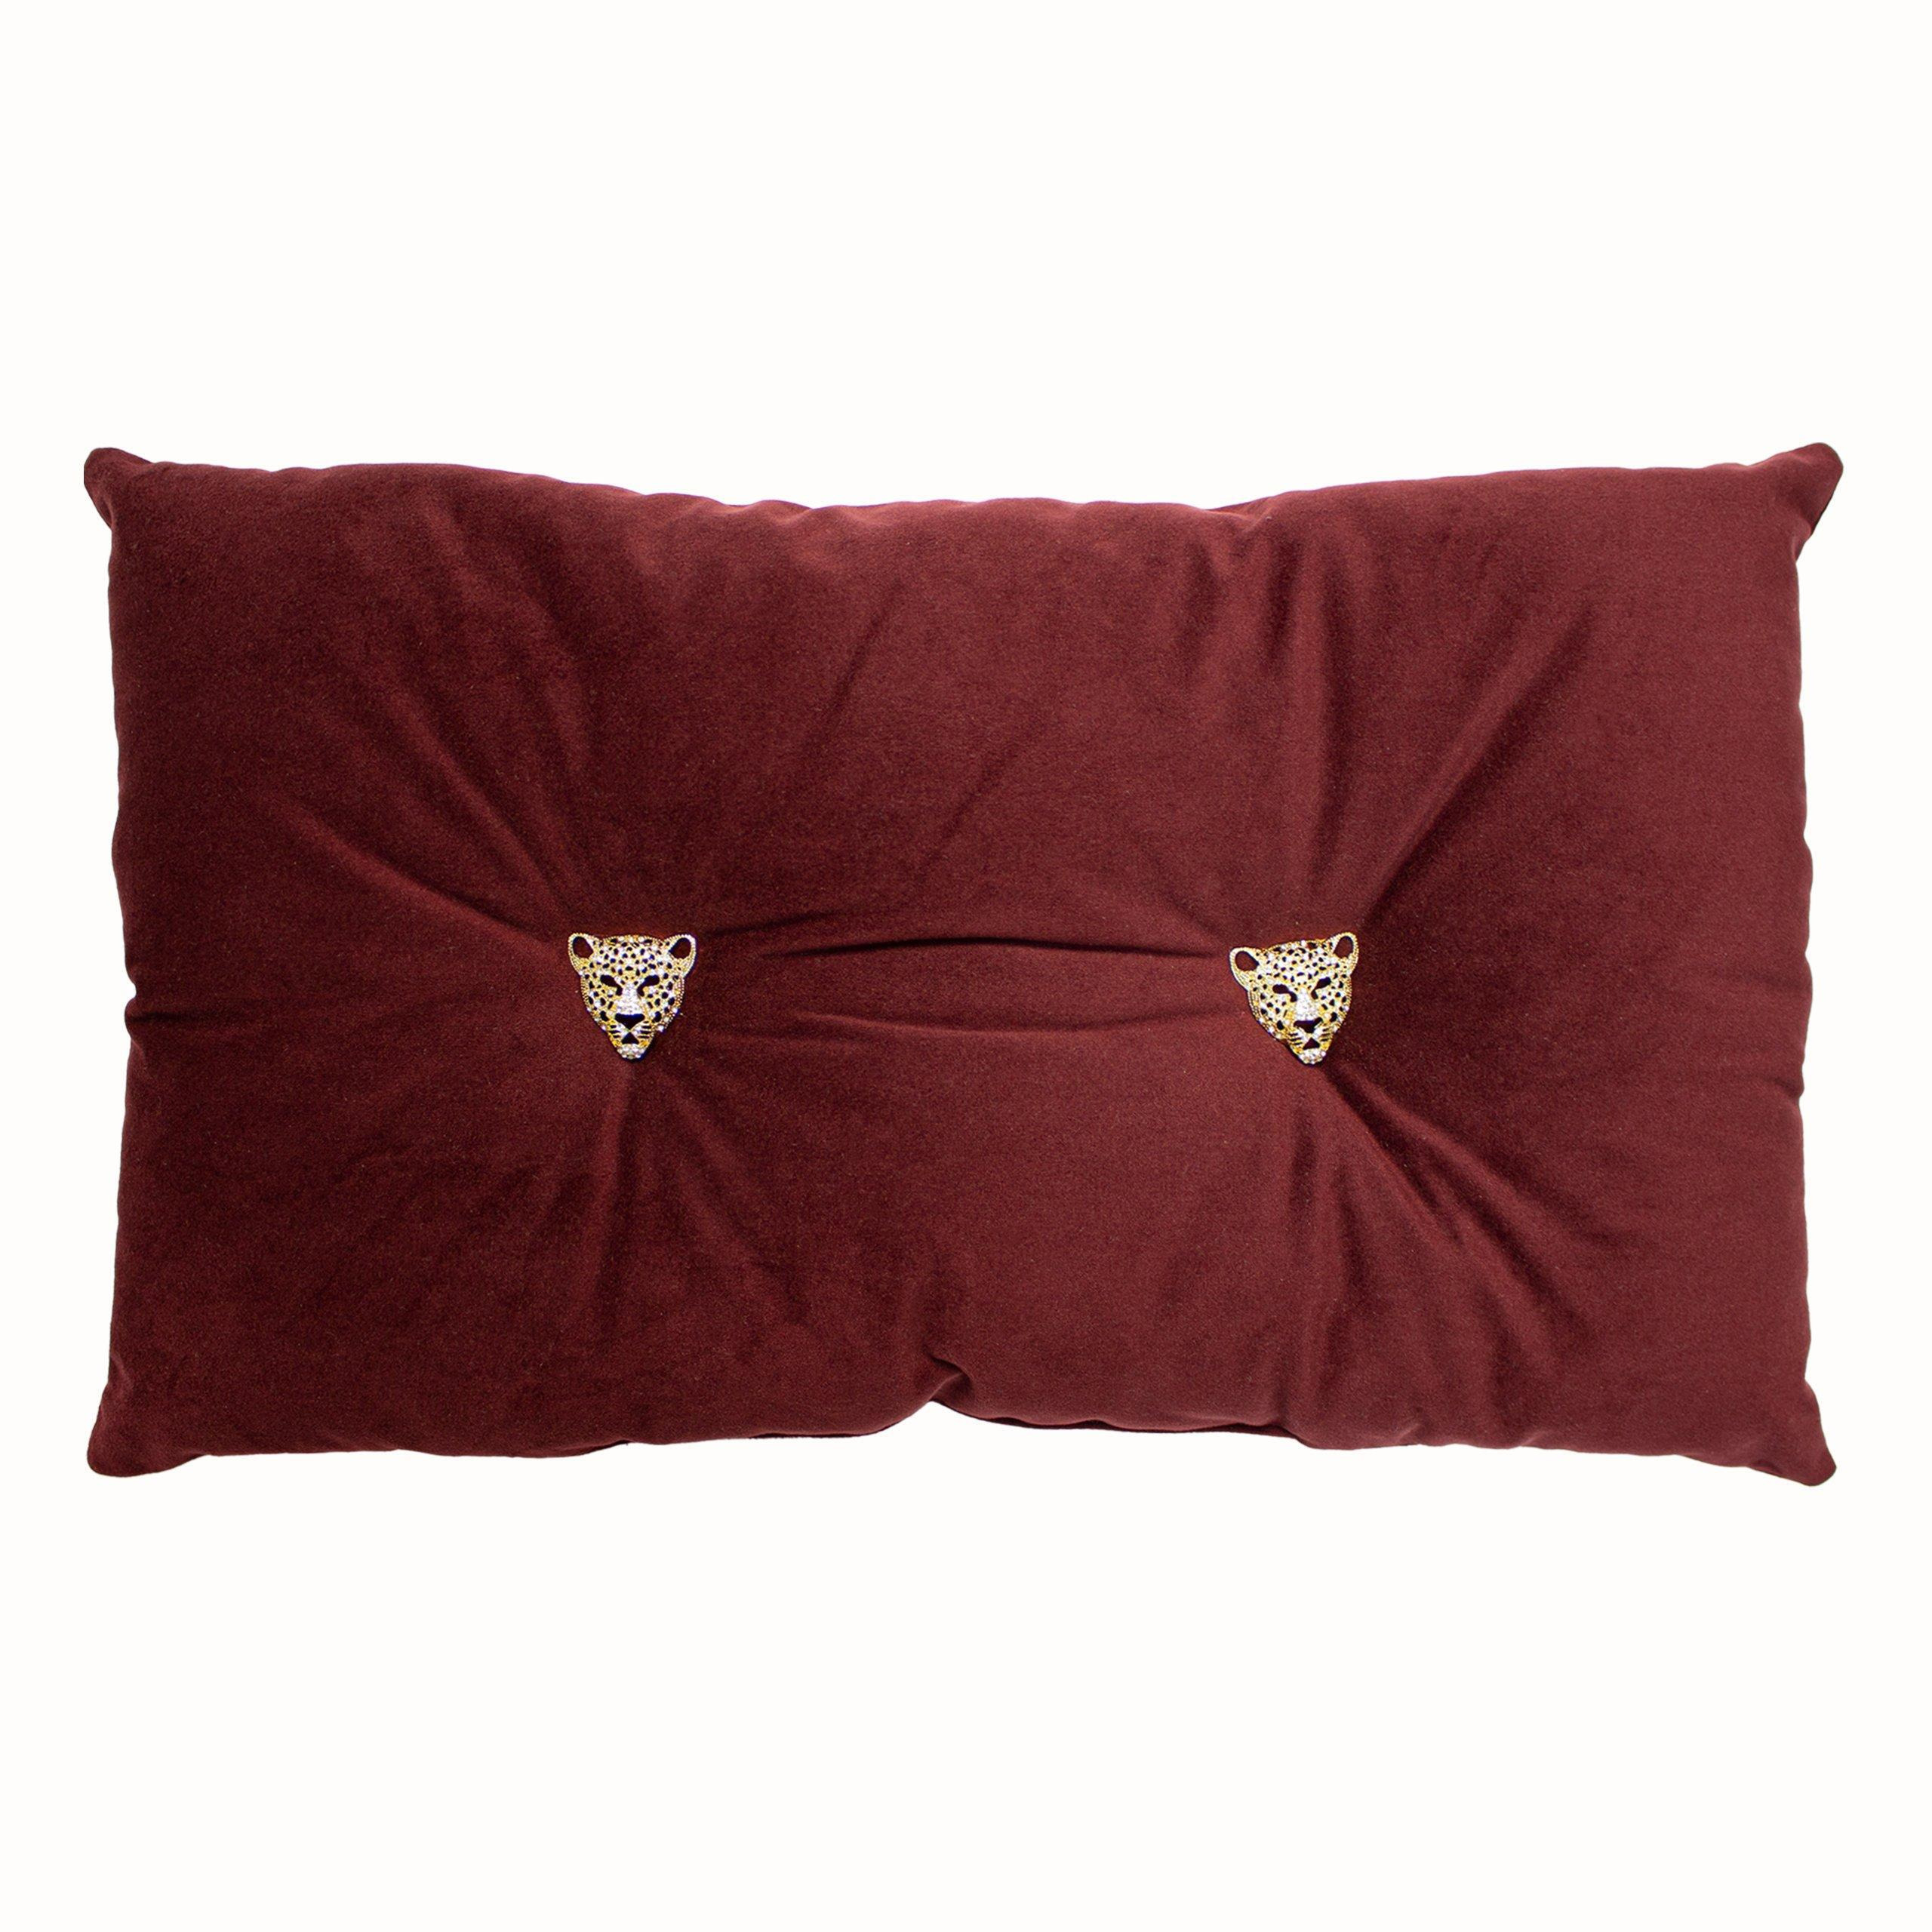 Panther Velvet Ready Filled Cushion - image 1